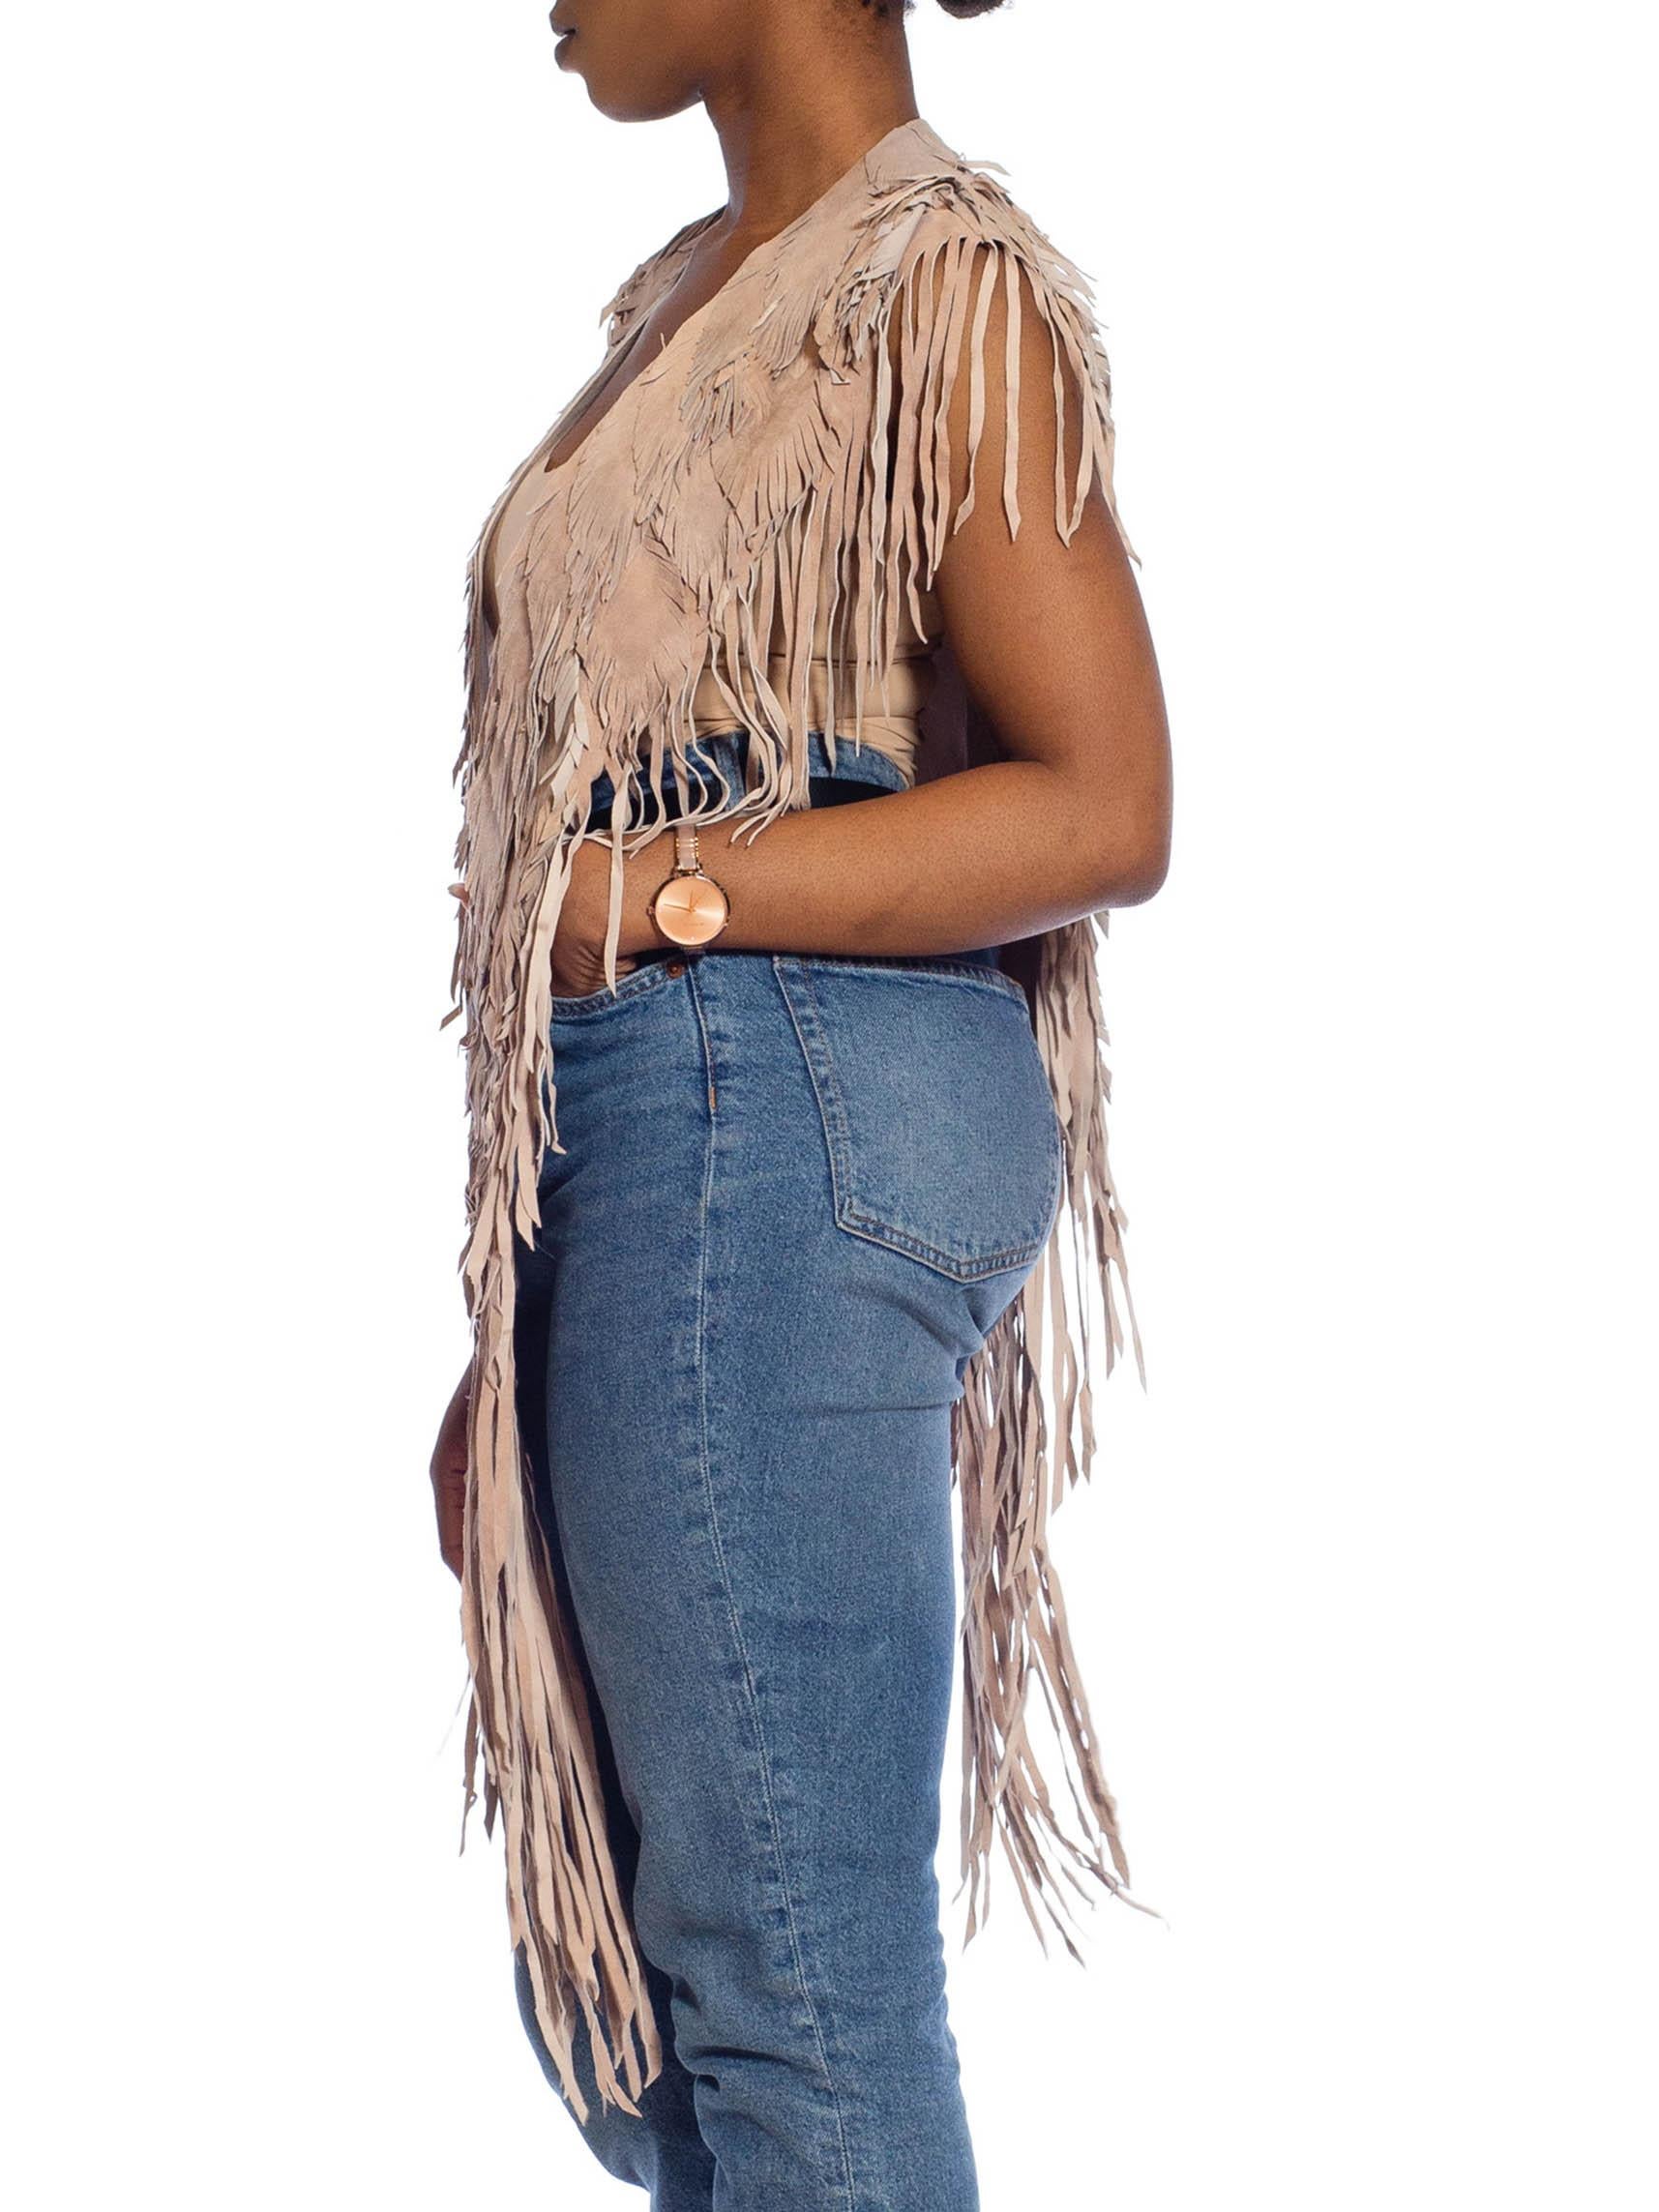 Each Feather-Leather is made by hand by our friends in Columbia in their co-op owned and operated facilities.  MORPHEW COLLECTION Sand Piper Suede Fringe Feather Leather Long Cape 
MORPHEW COLLECTION is made entirely by hand in our NYC Ateliér of